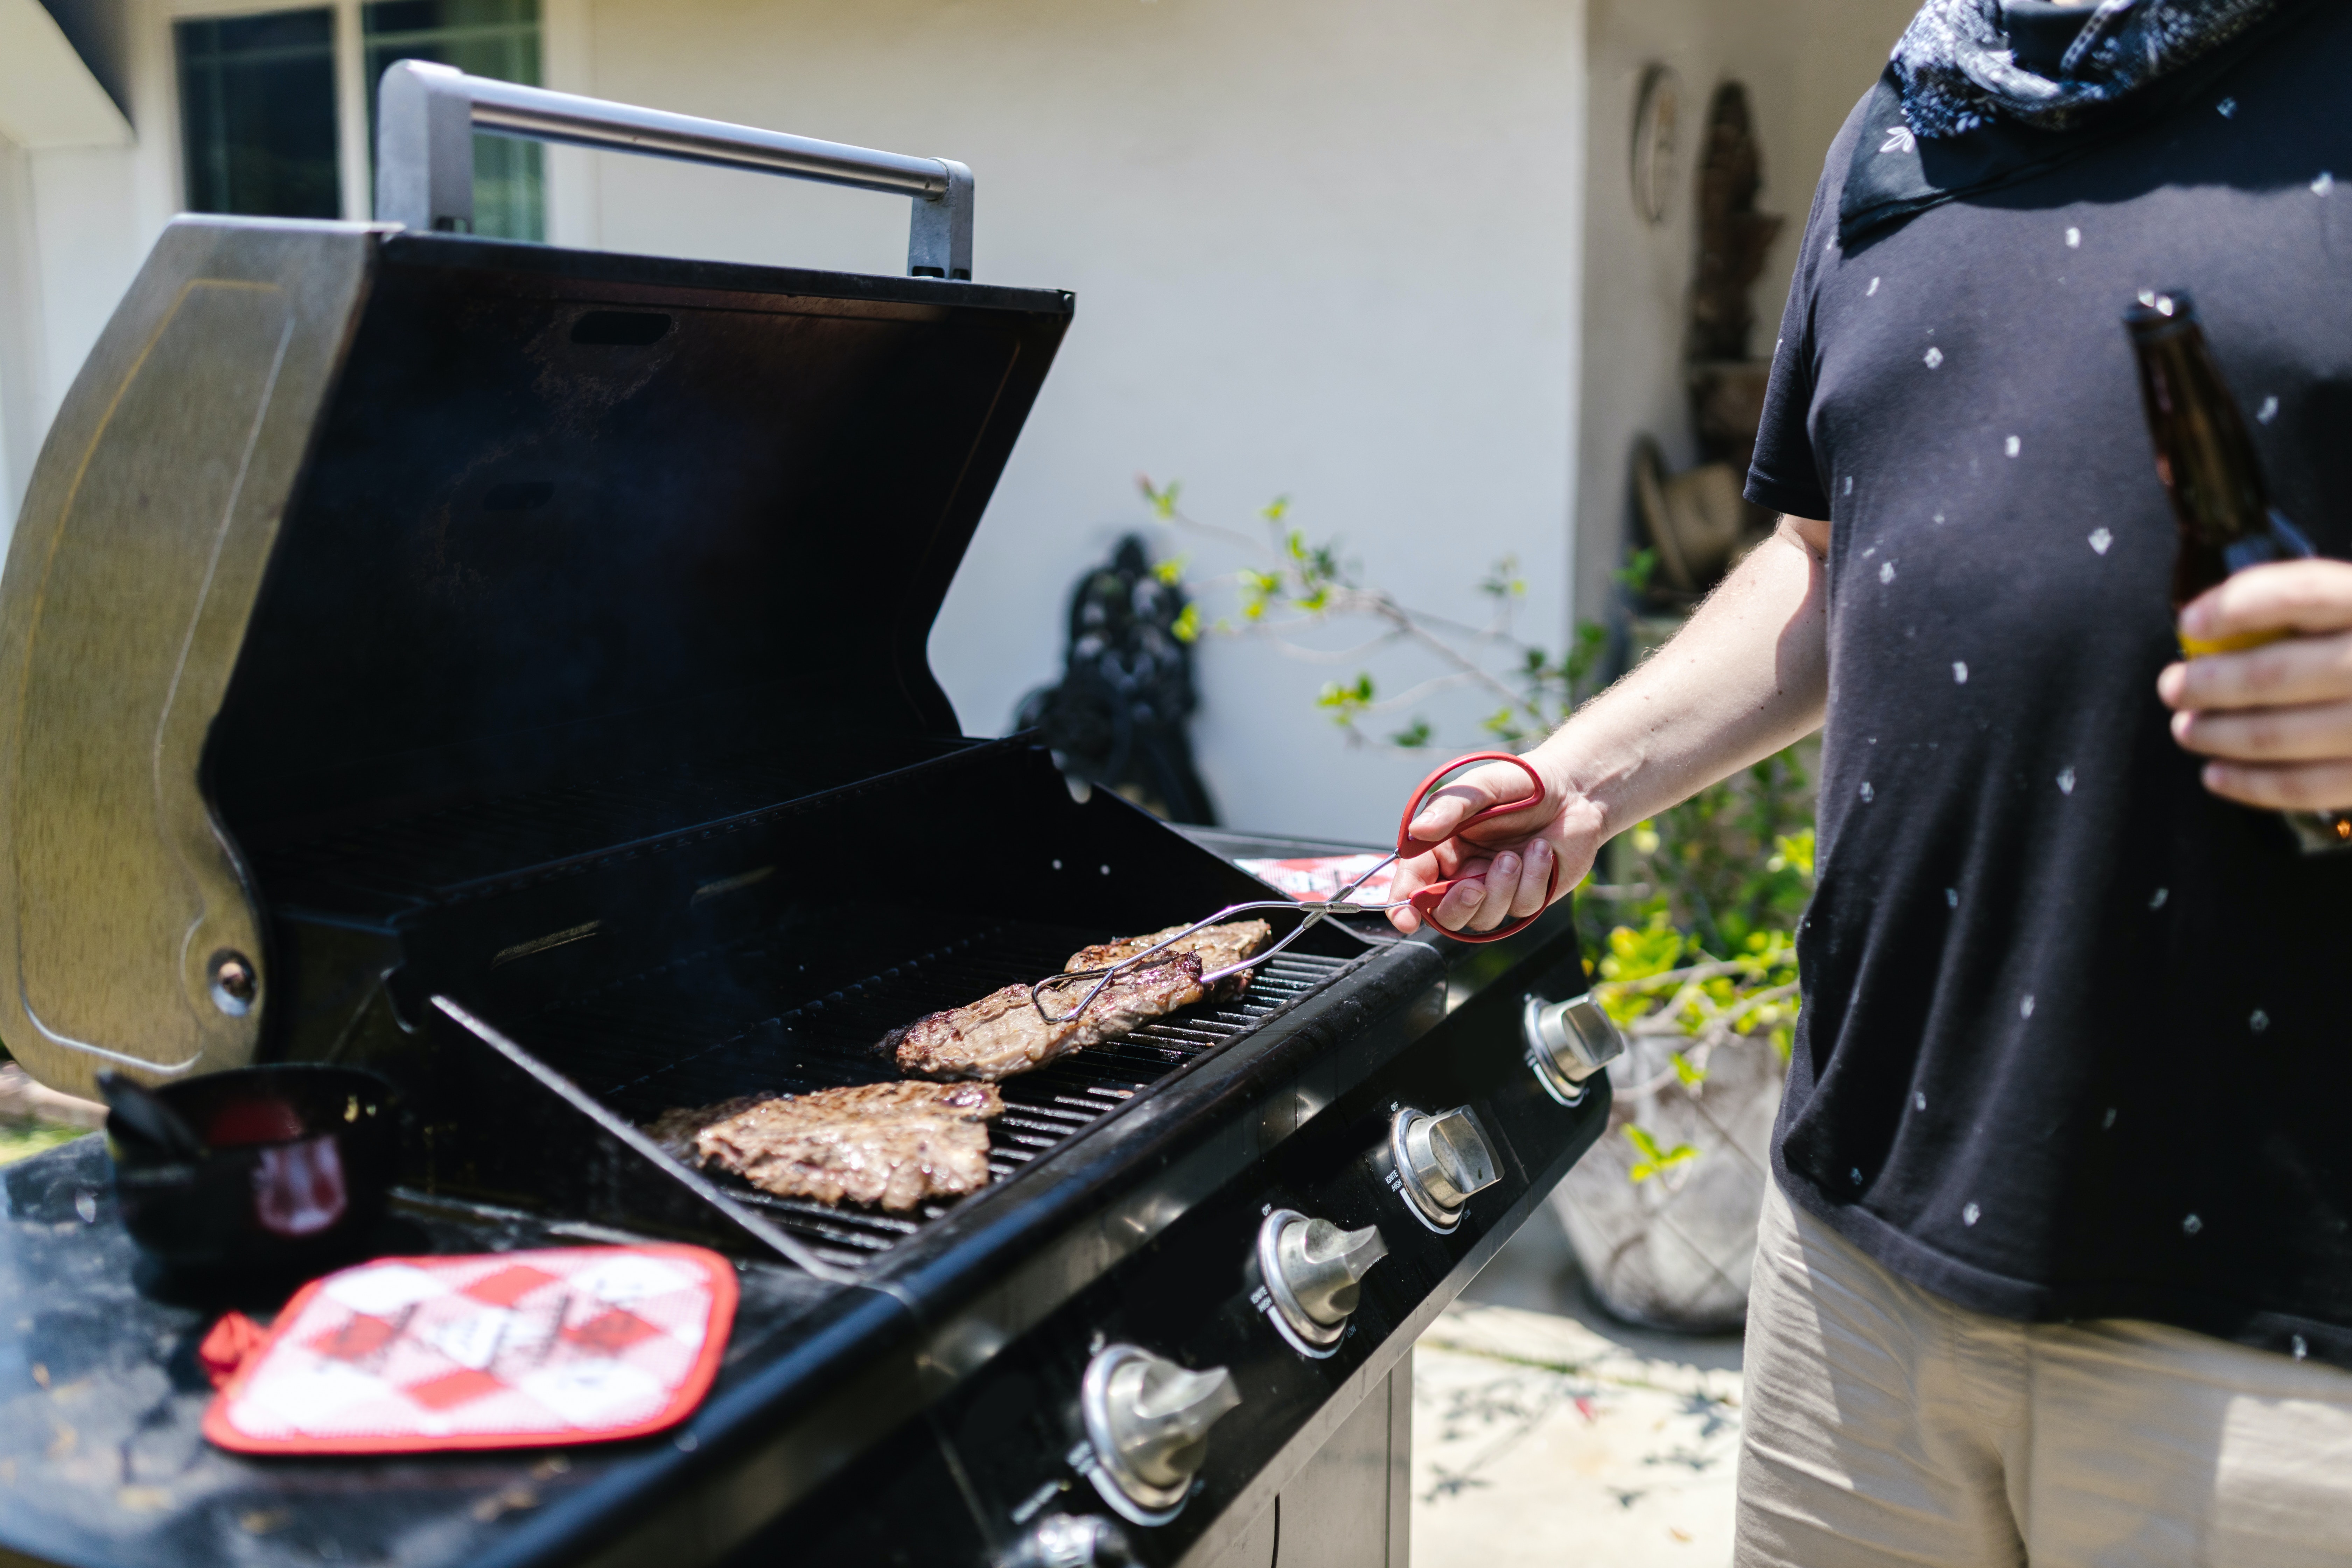  A person making hamburgers with the help of a grill